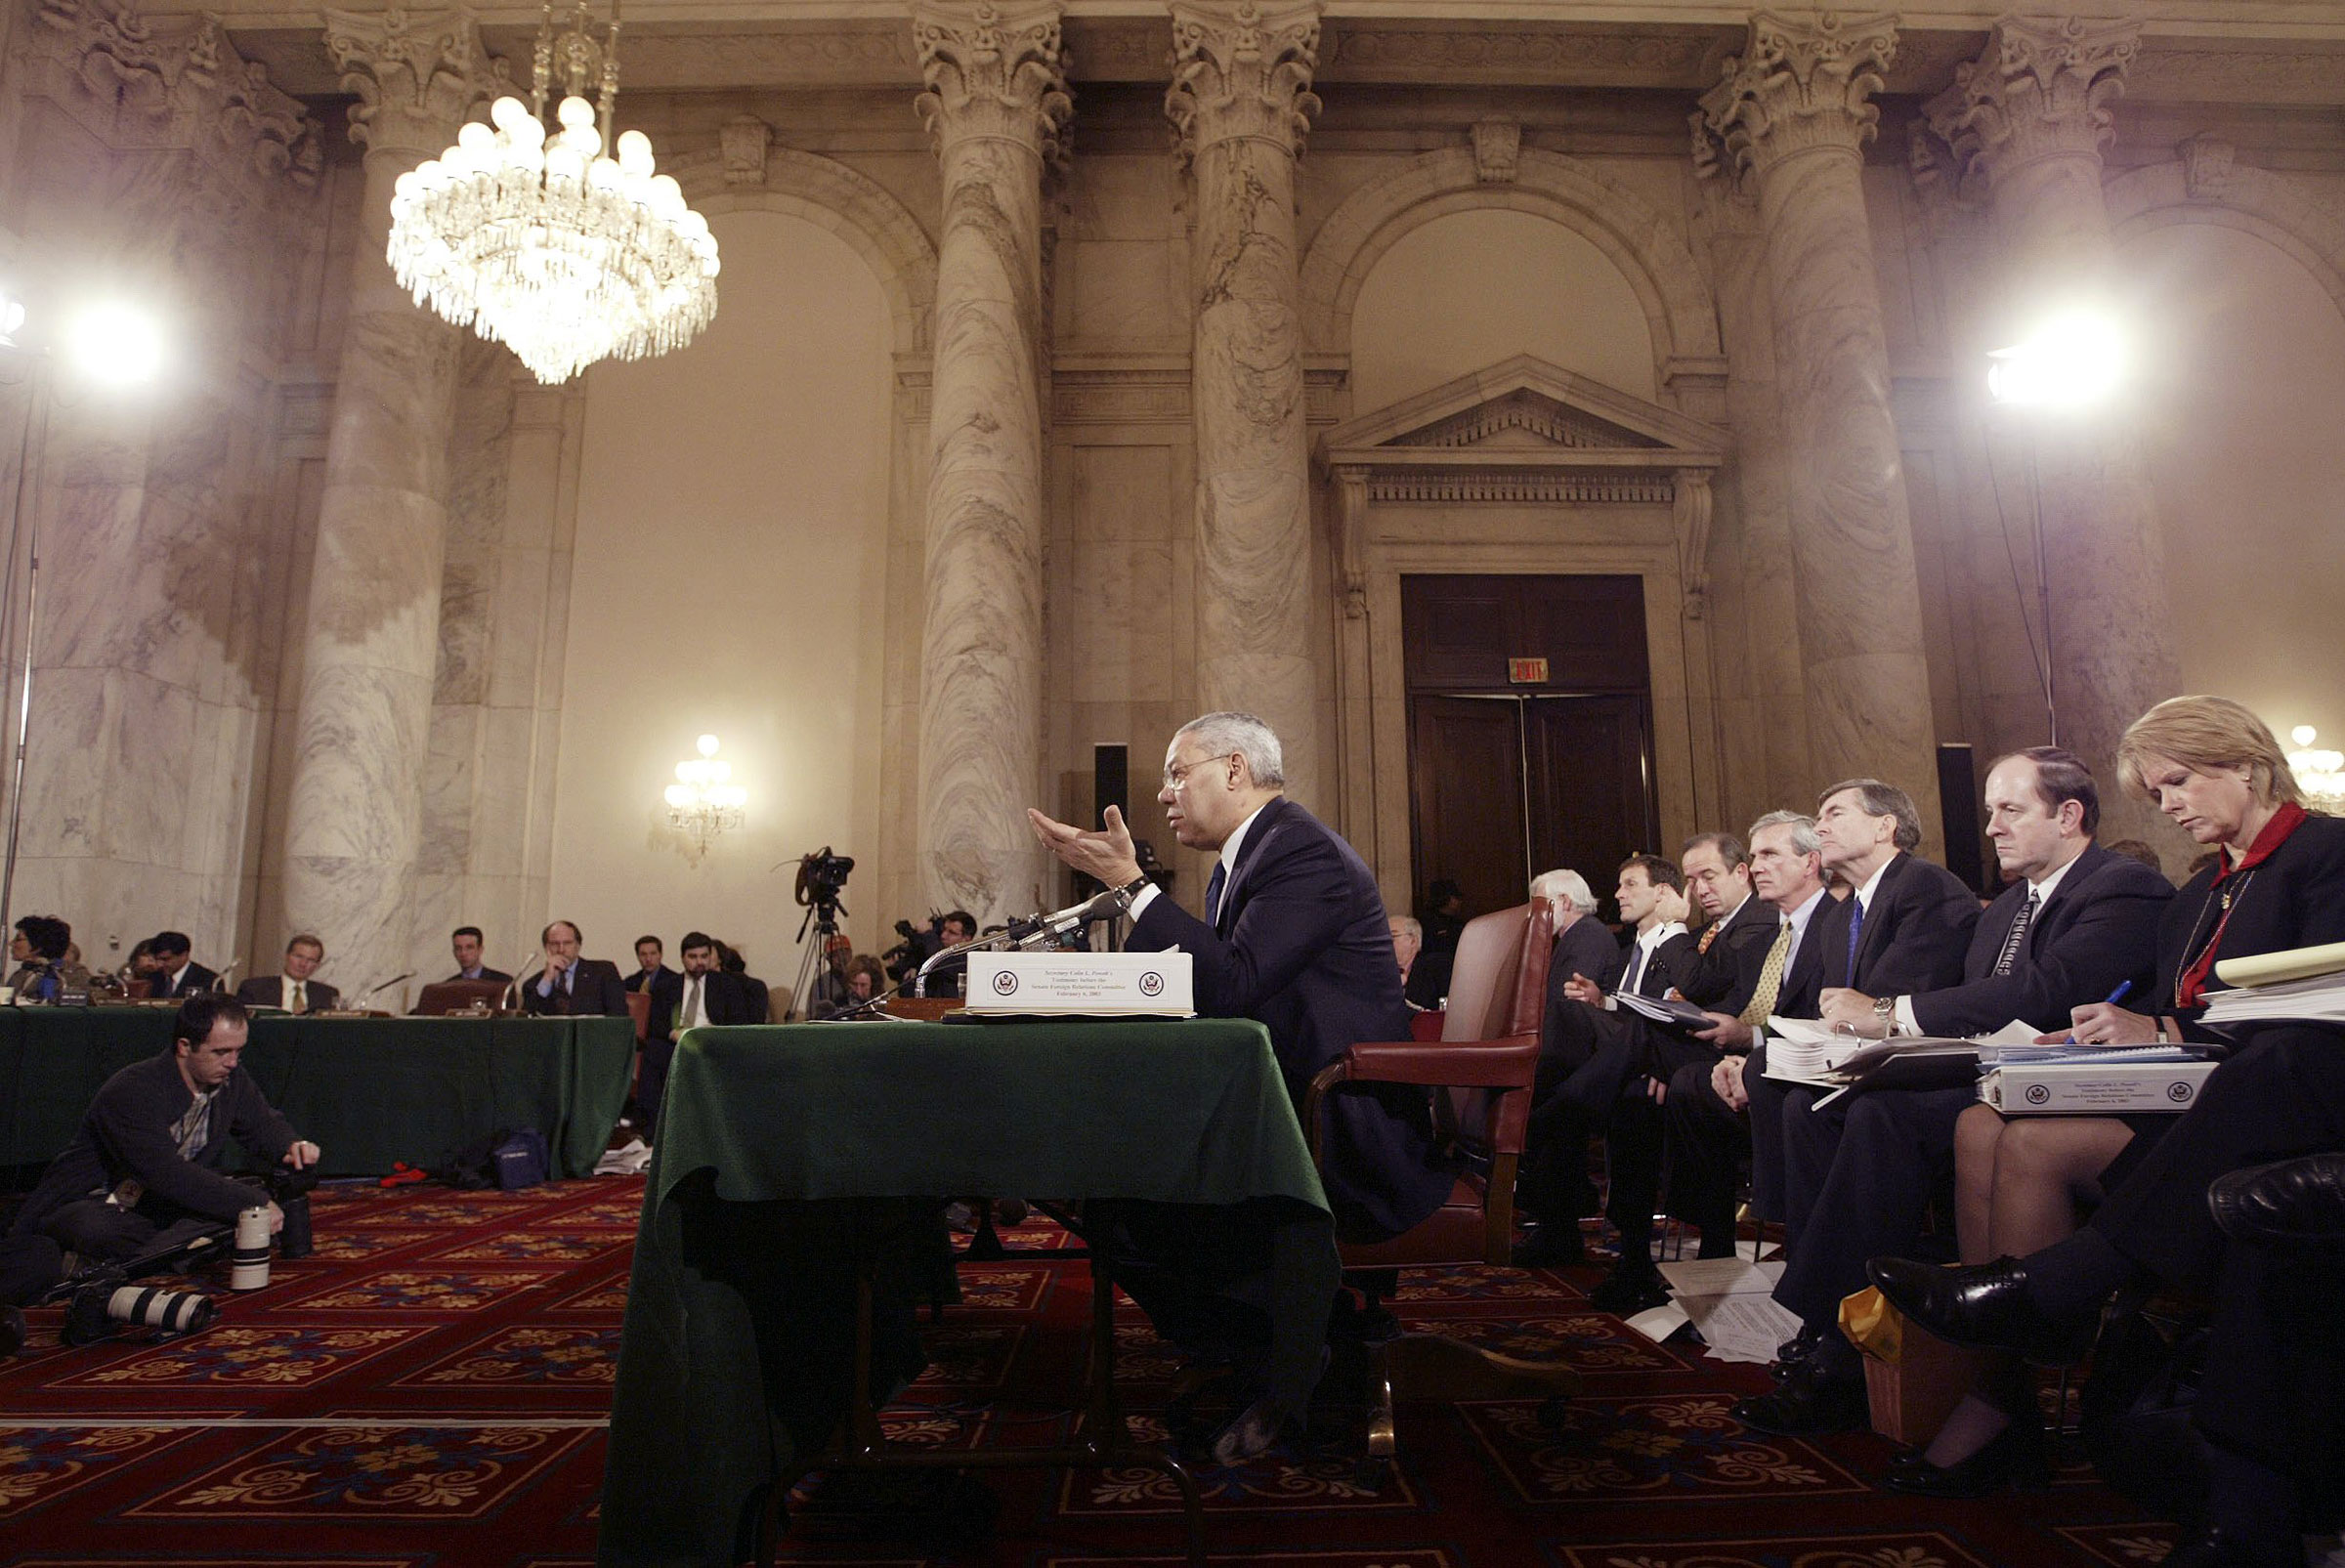 Secretary of State Colin Powell, who was seeking congressional support for a possible war against Iraq, testifies before the Senate Foreign Relations Committee, on Feb. 6, 2003. (Chuck Kennedy—MCT/Tribune News Service/Getty Images)